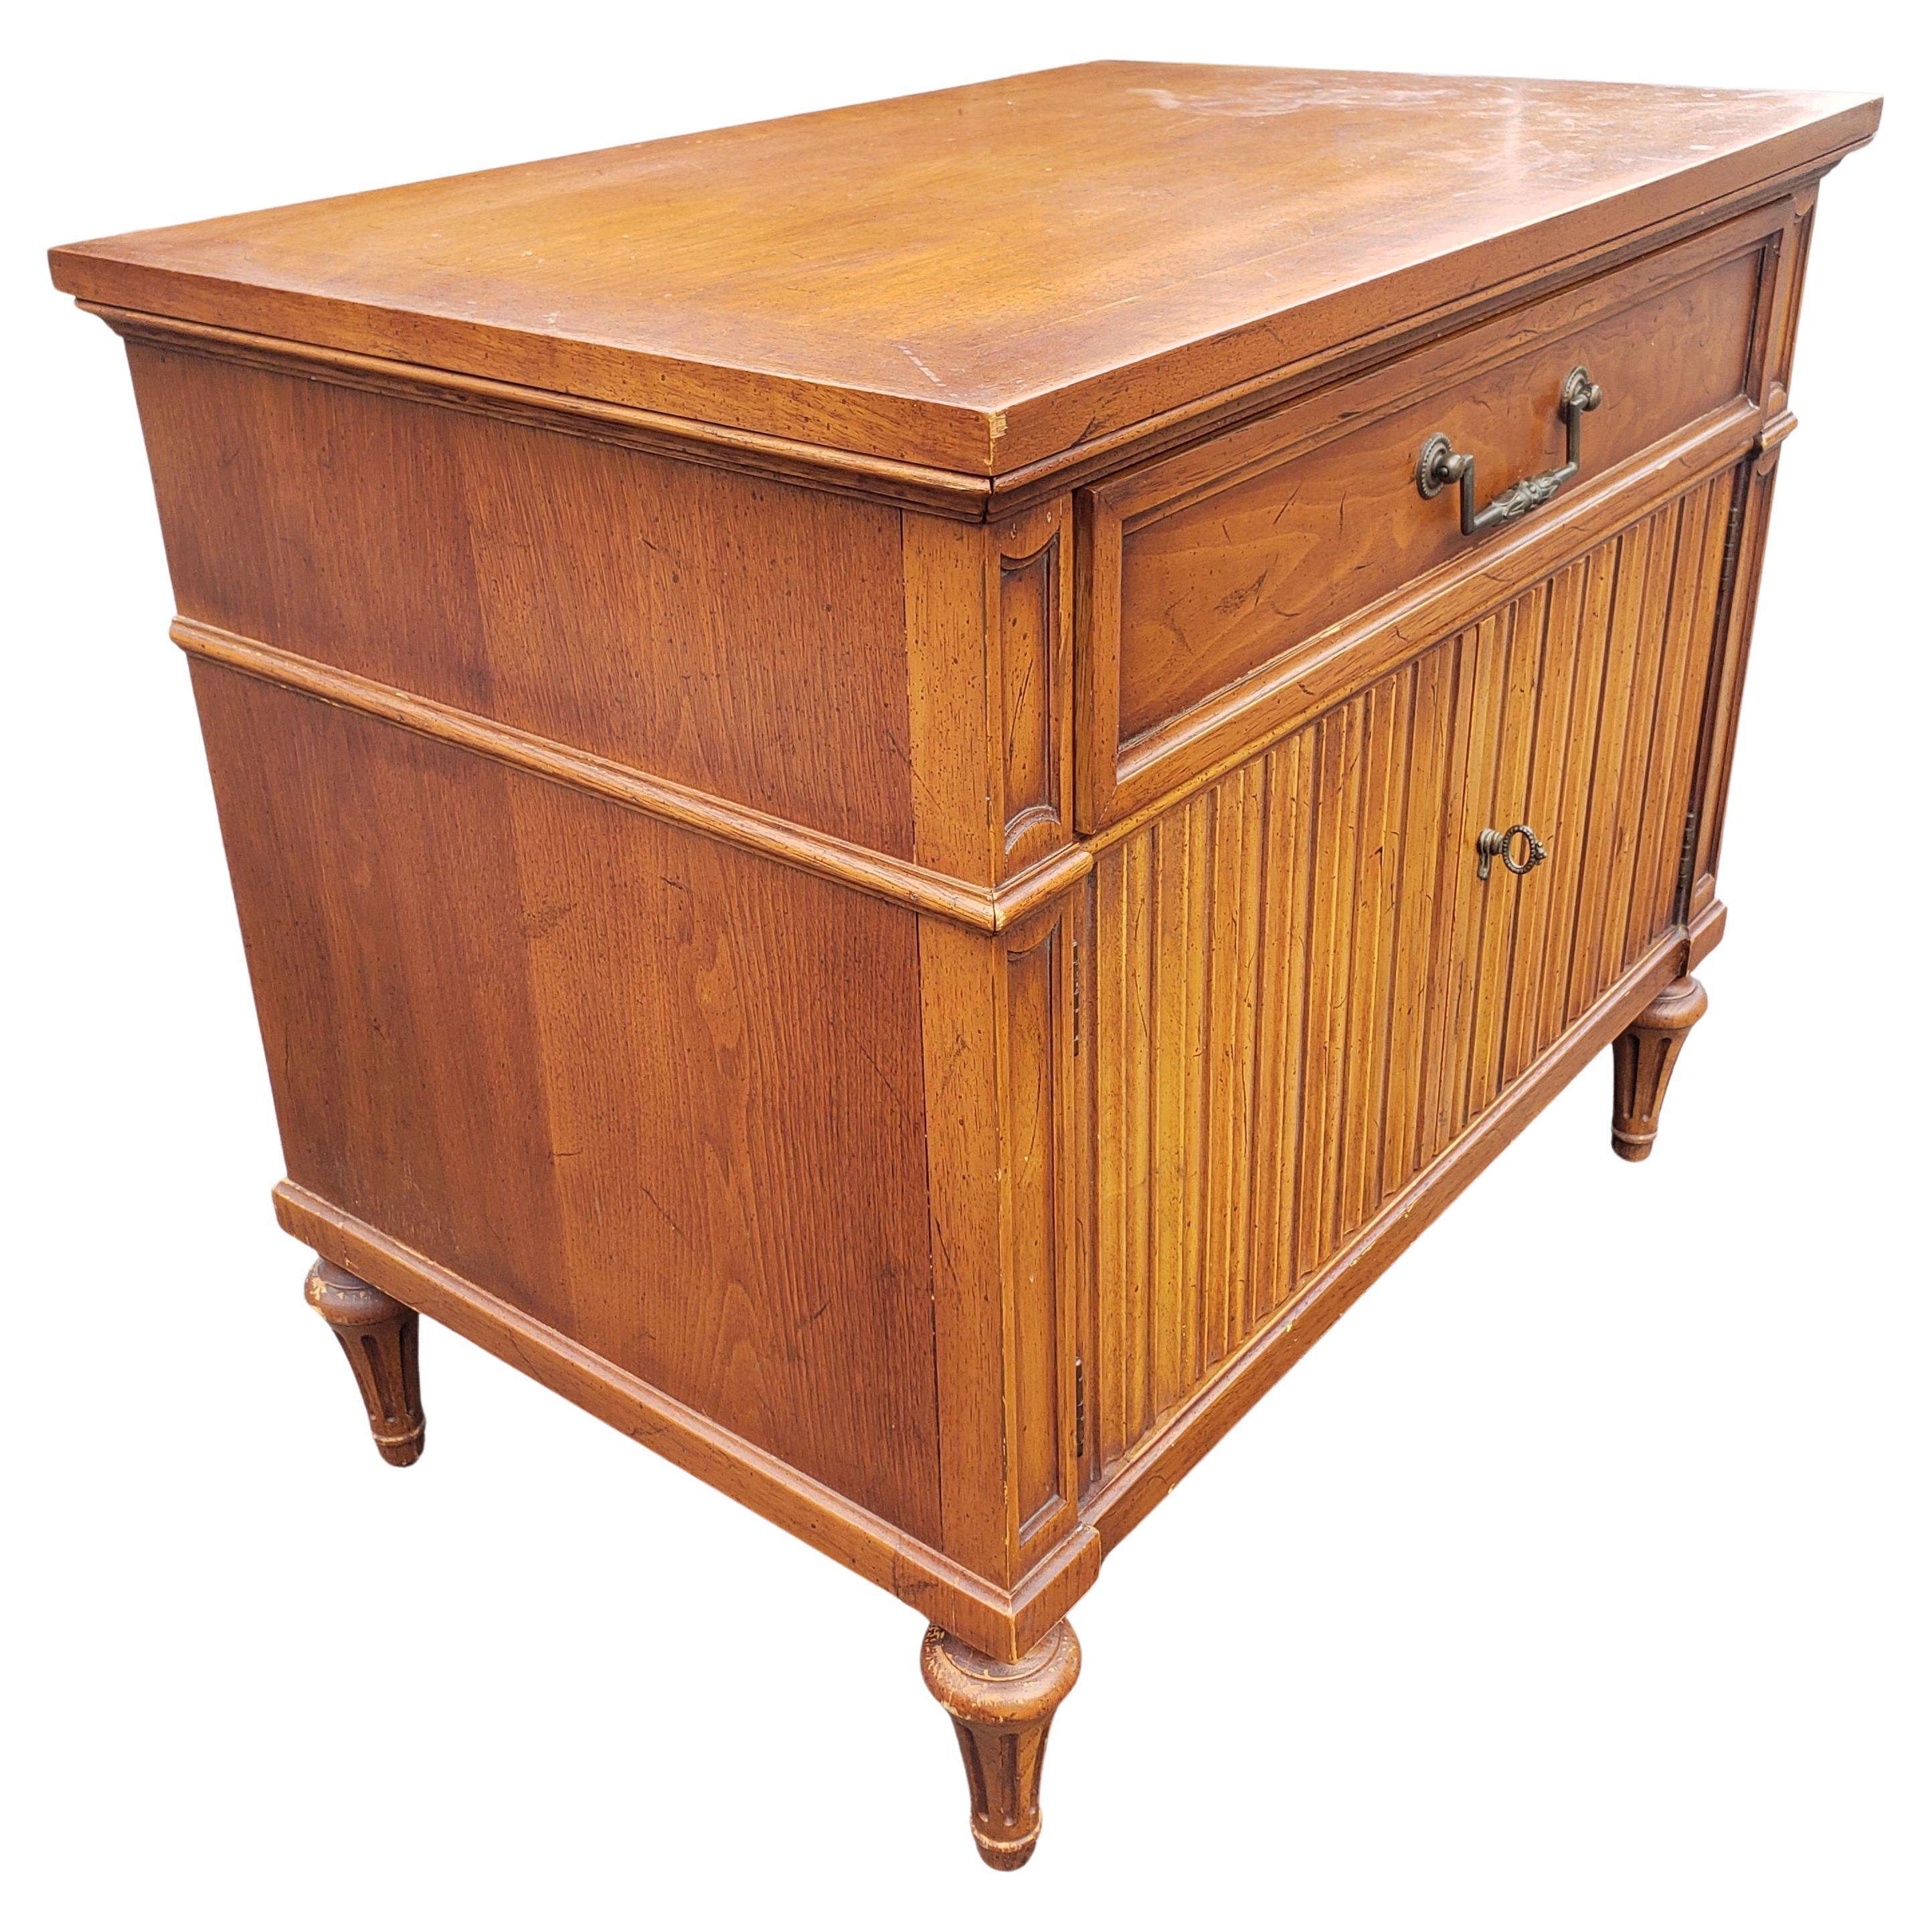 Rare pair of Henredon Custom Folio One Fruitwood bedside tables in very good vintage condition. Features one top drawers a bottom, French style two door cabinet with plenty of storage capacity.
Measures.